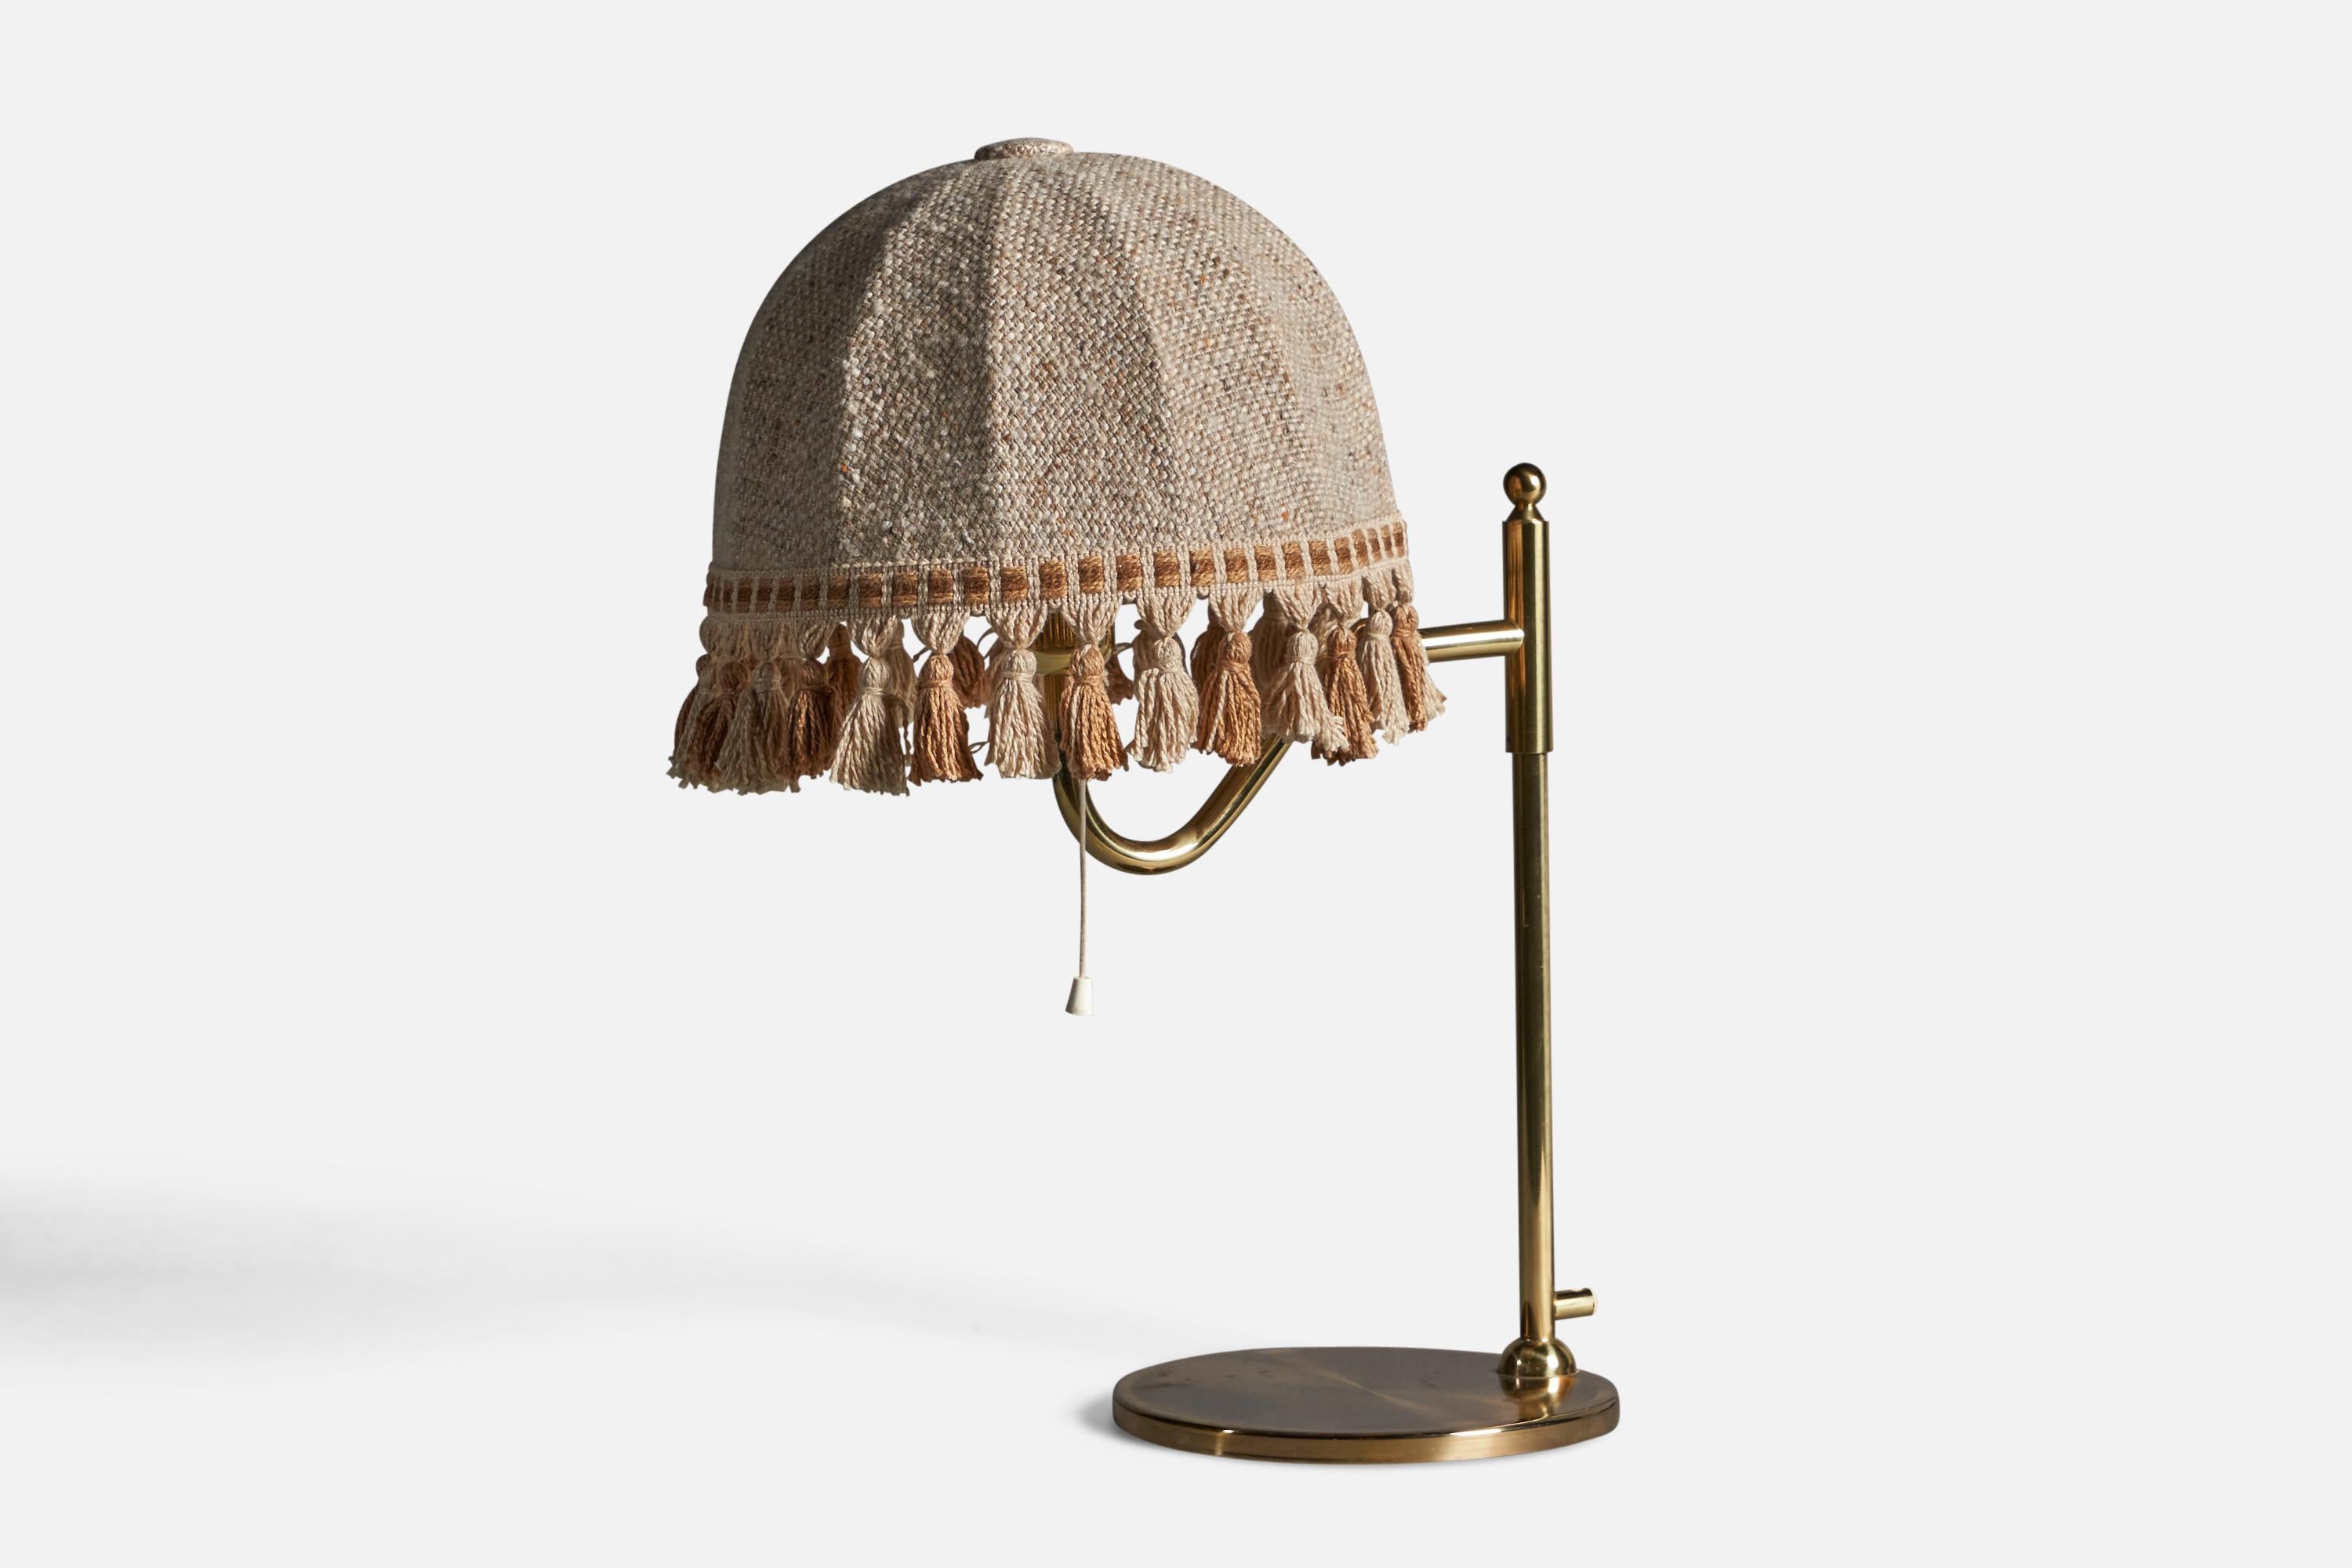 A brass and woven beige fabric table lamp, designed and produced by Nya Öia, Sweden, 1970s.

Overall Dimensions (inches): 22